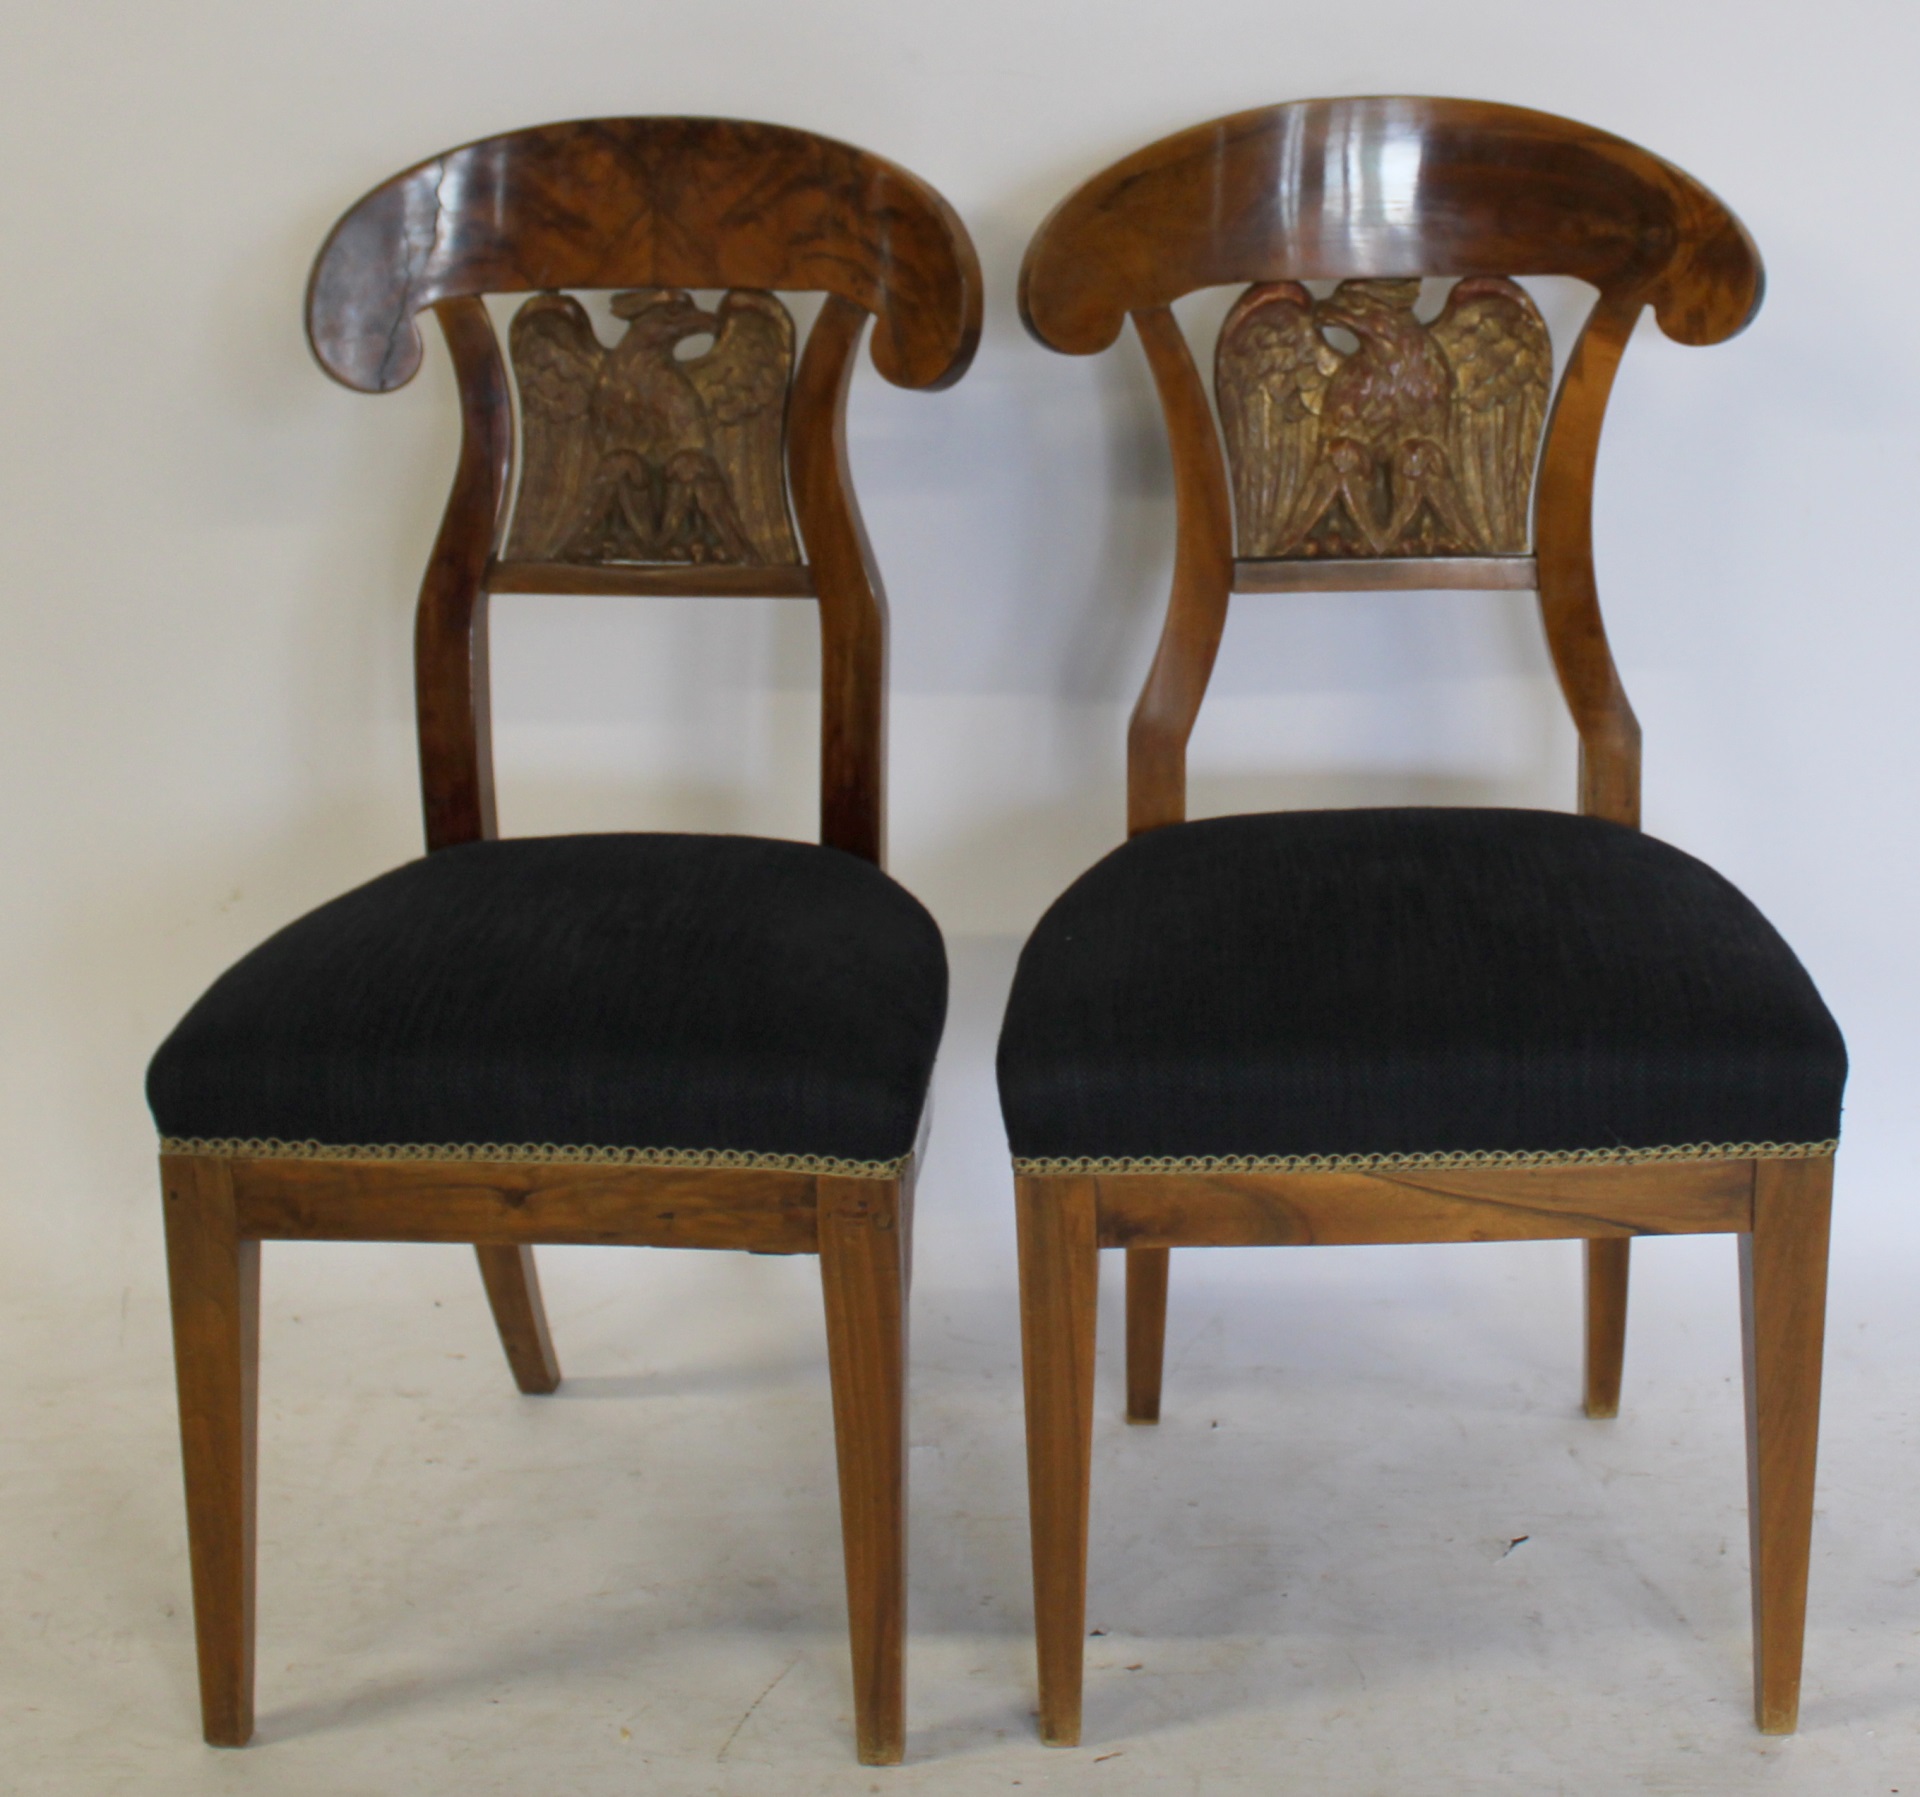 A PAIR OF BIEDERMEIER CHAIRS WITH